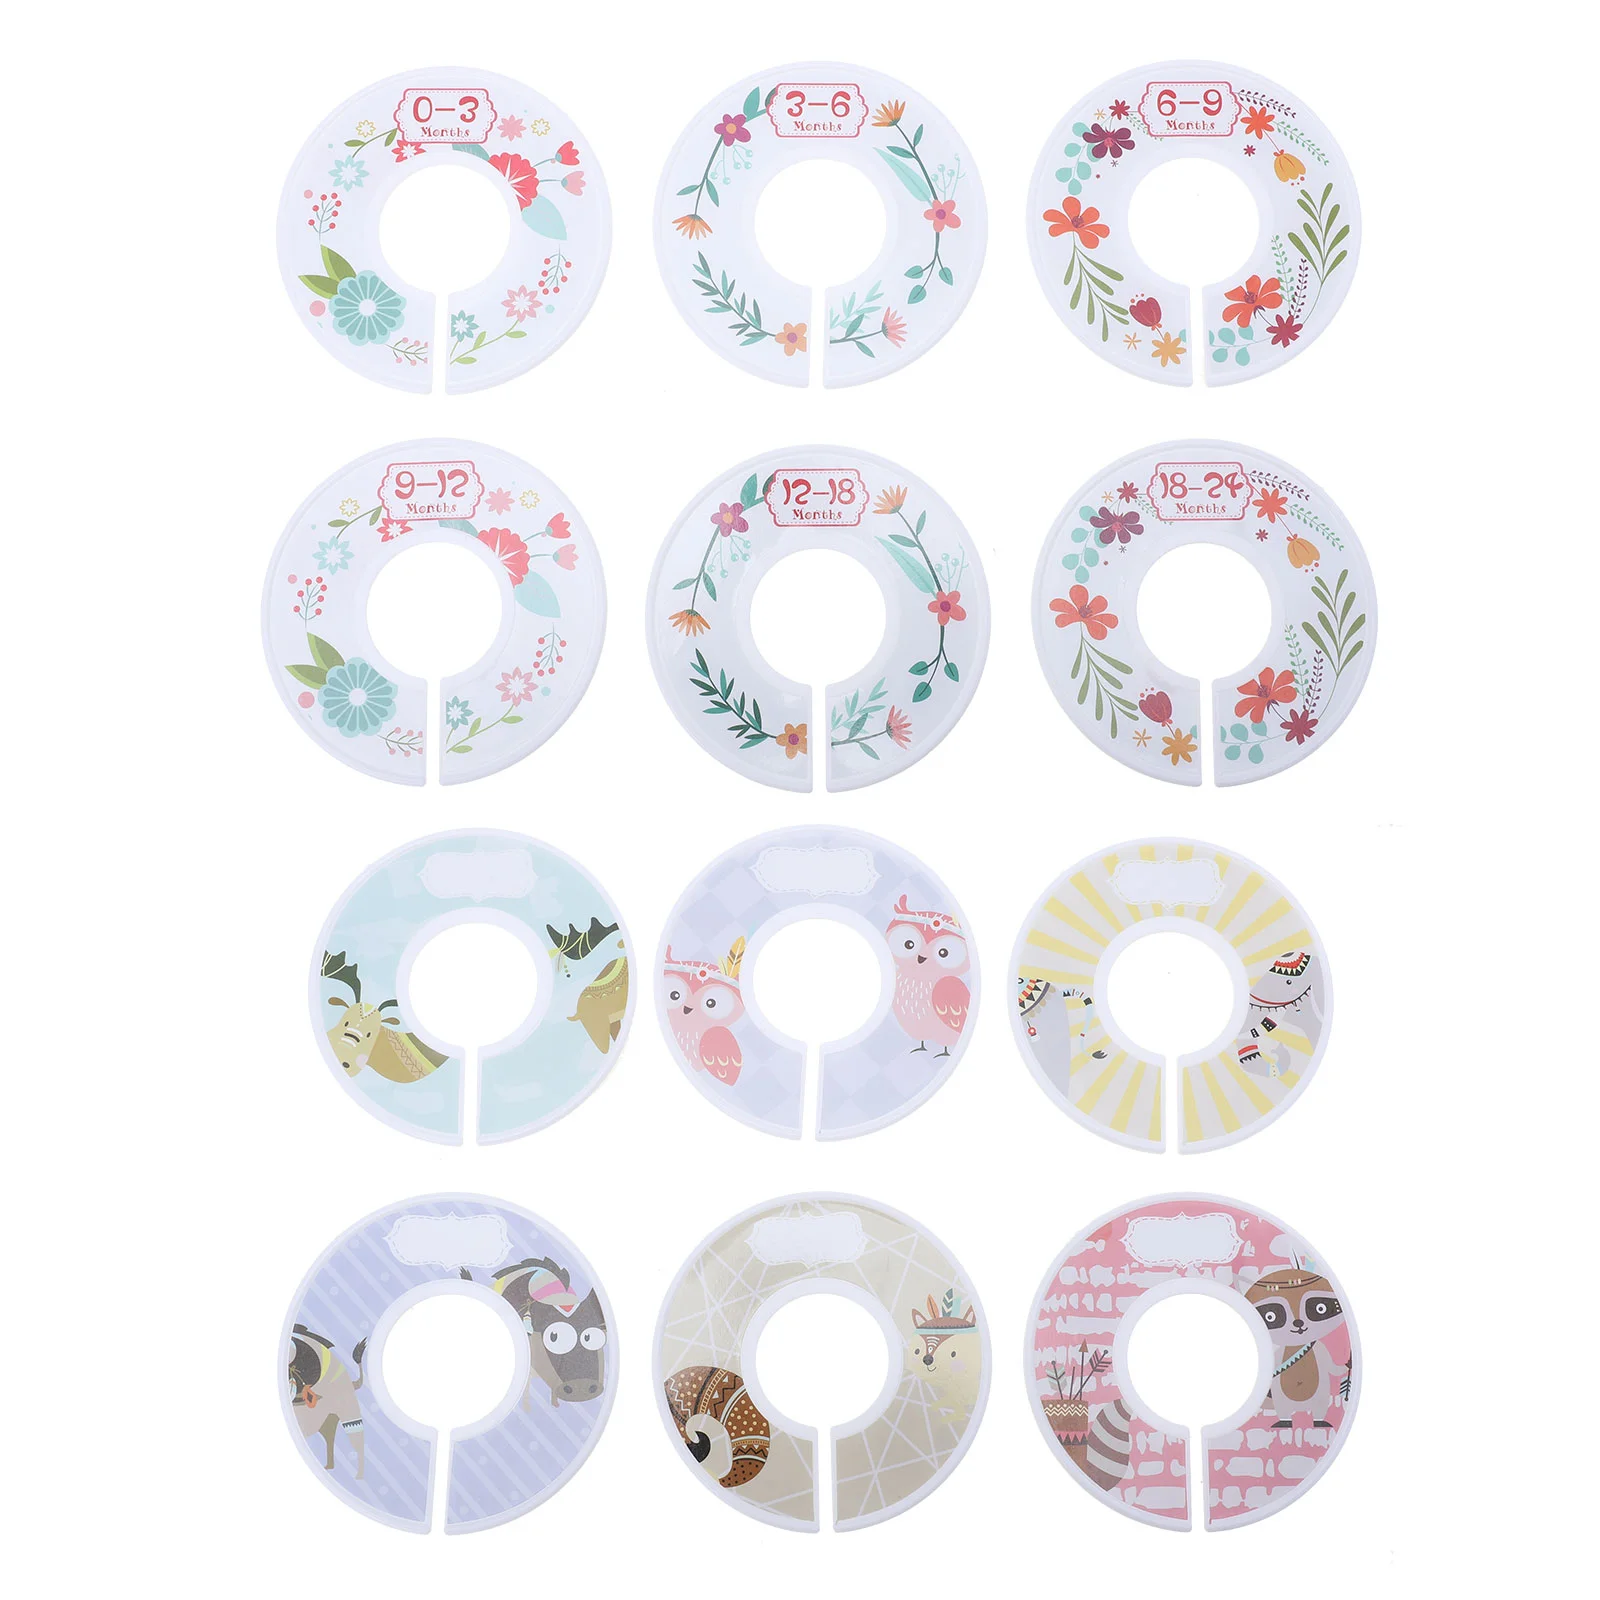 

12 Pcs Size Separator Clothes Organizers DIY Closet Divider Plastic Newborn Outfits Baby Clothing Dividers Nursery Coat Hanger